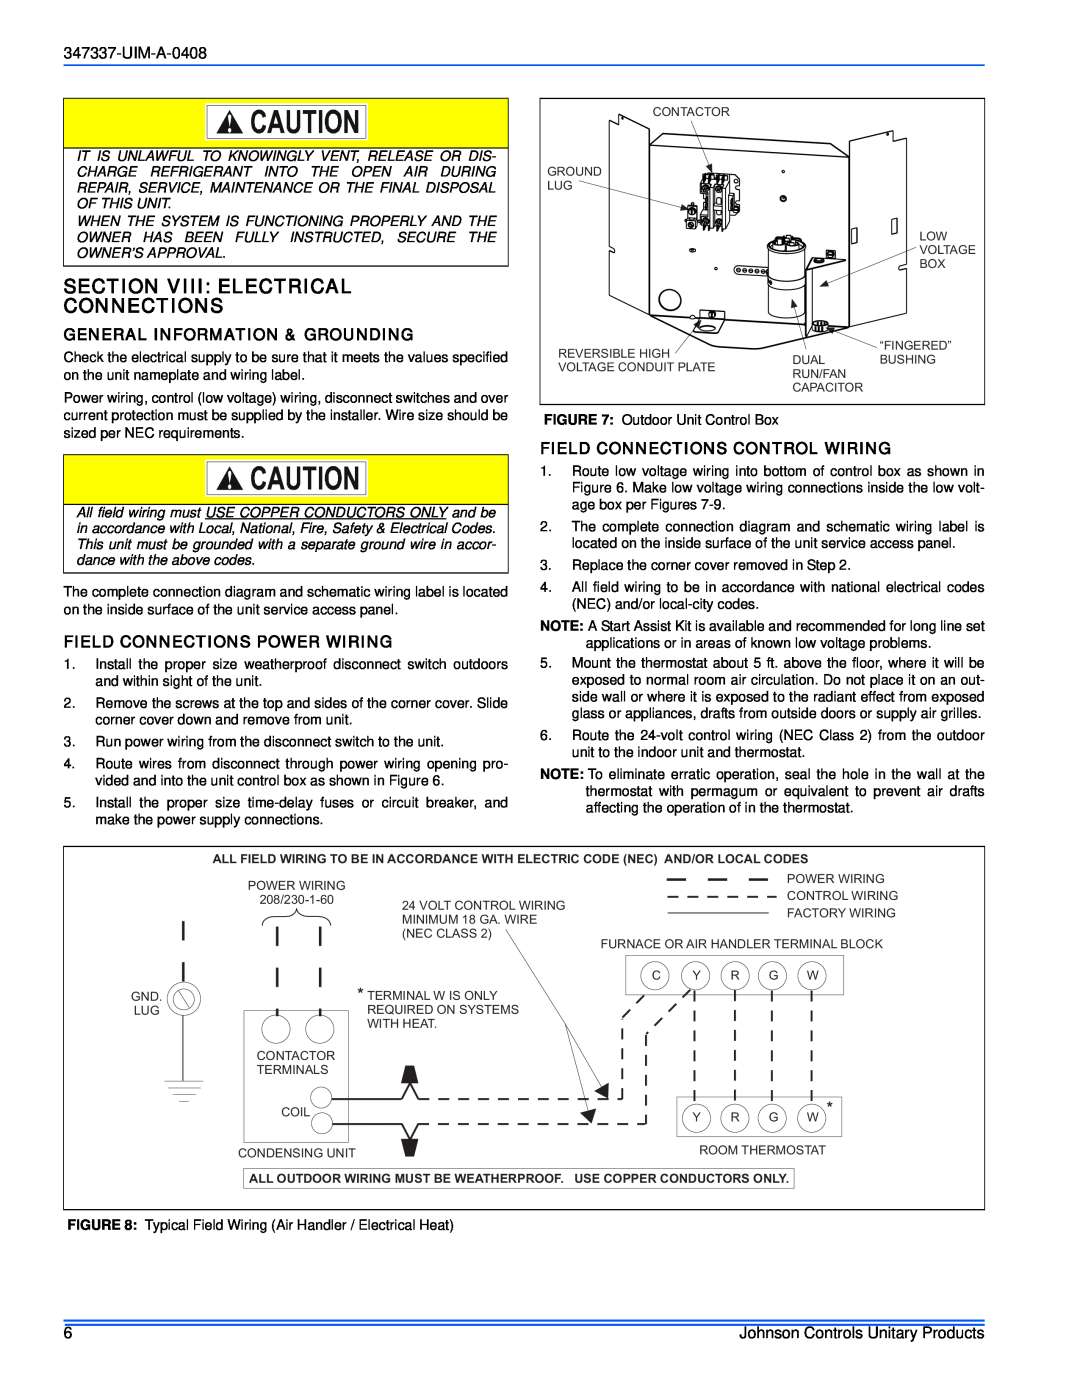 Johnson Controls 13 SEER Section Viii Electrical Connections, General Information & Grounding, UIM-A-0408 